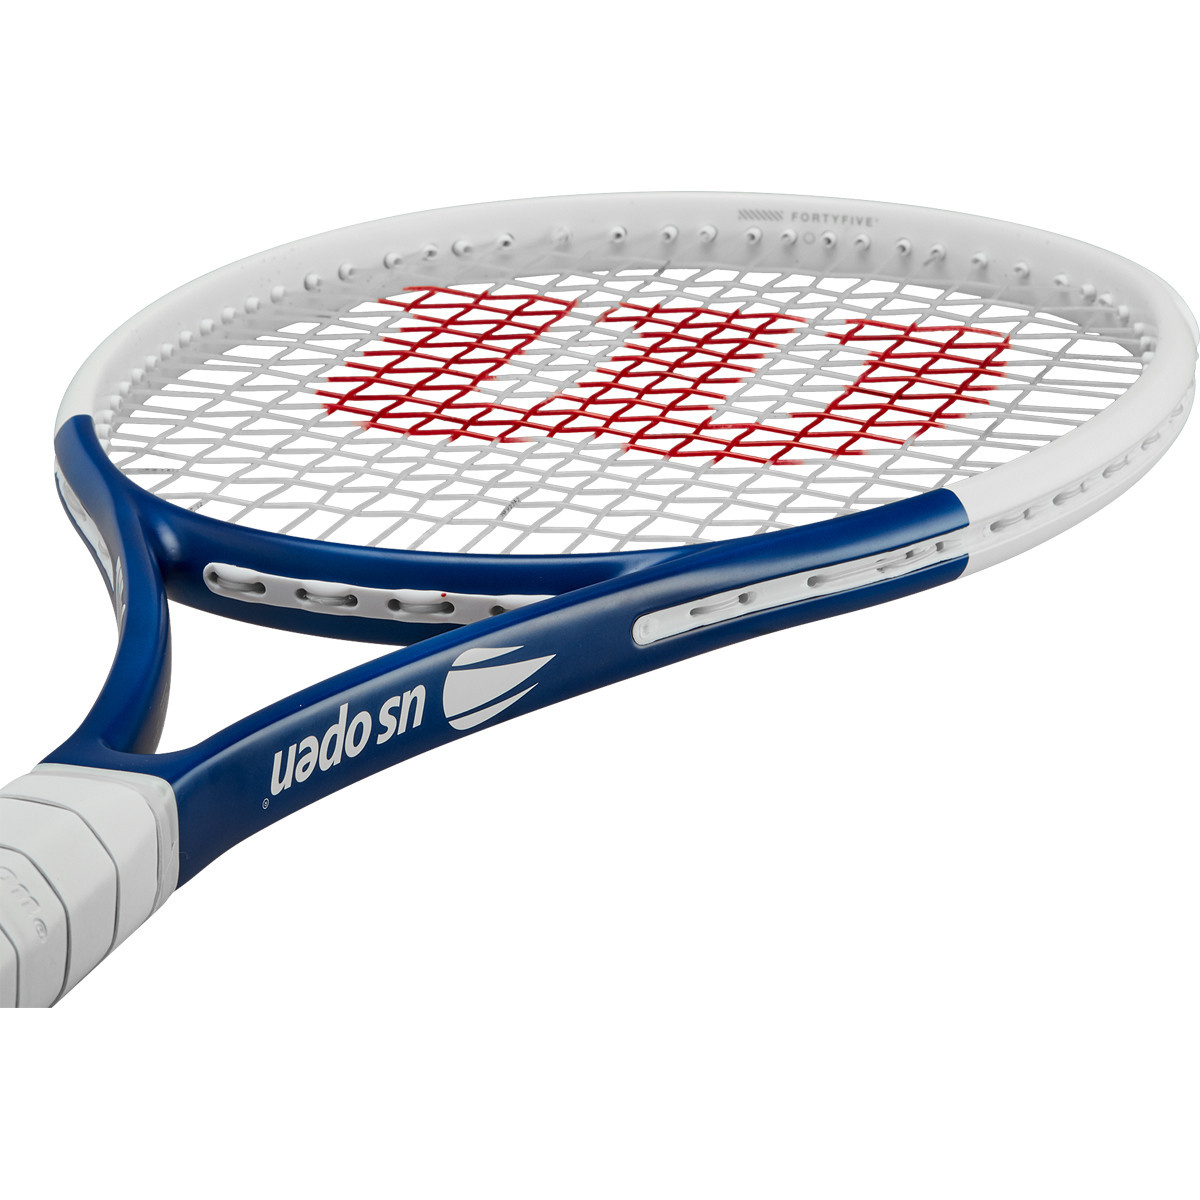 Blade 98 16x19 v8 US Open - Tennis Topia - Best Sale Prices and 